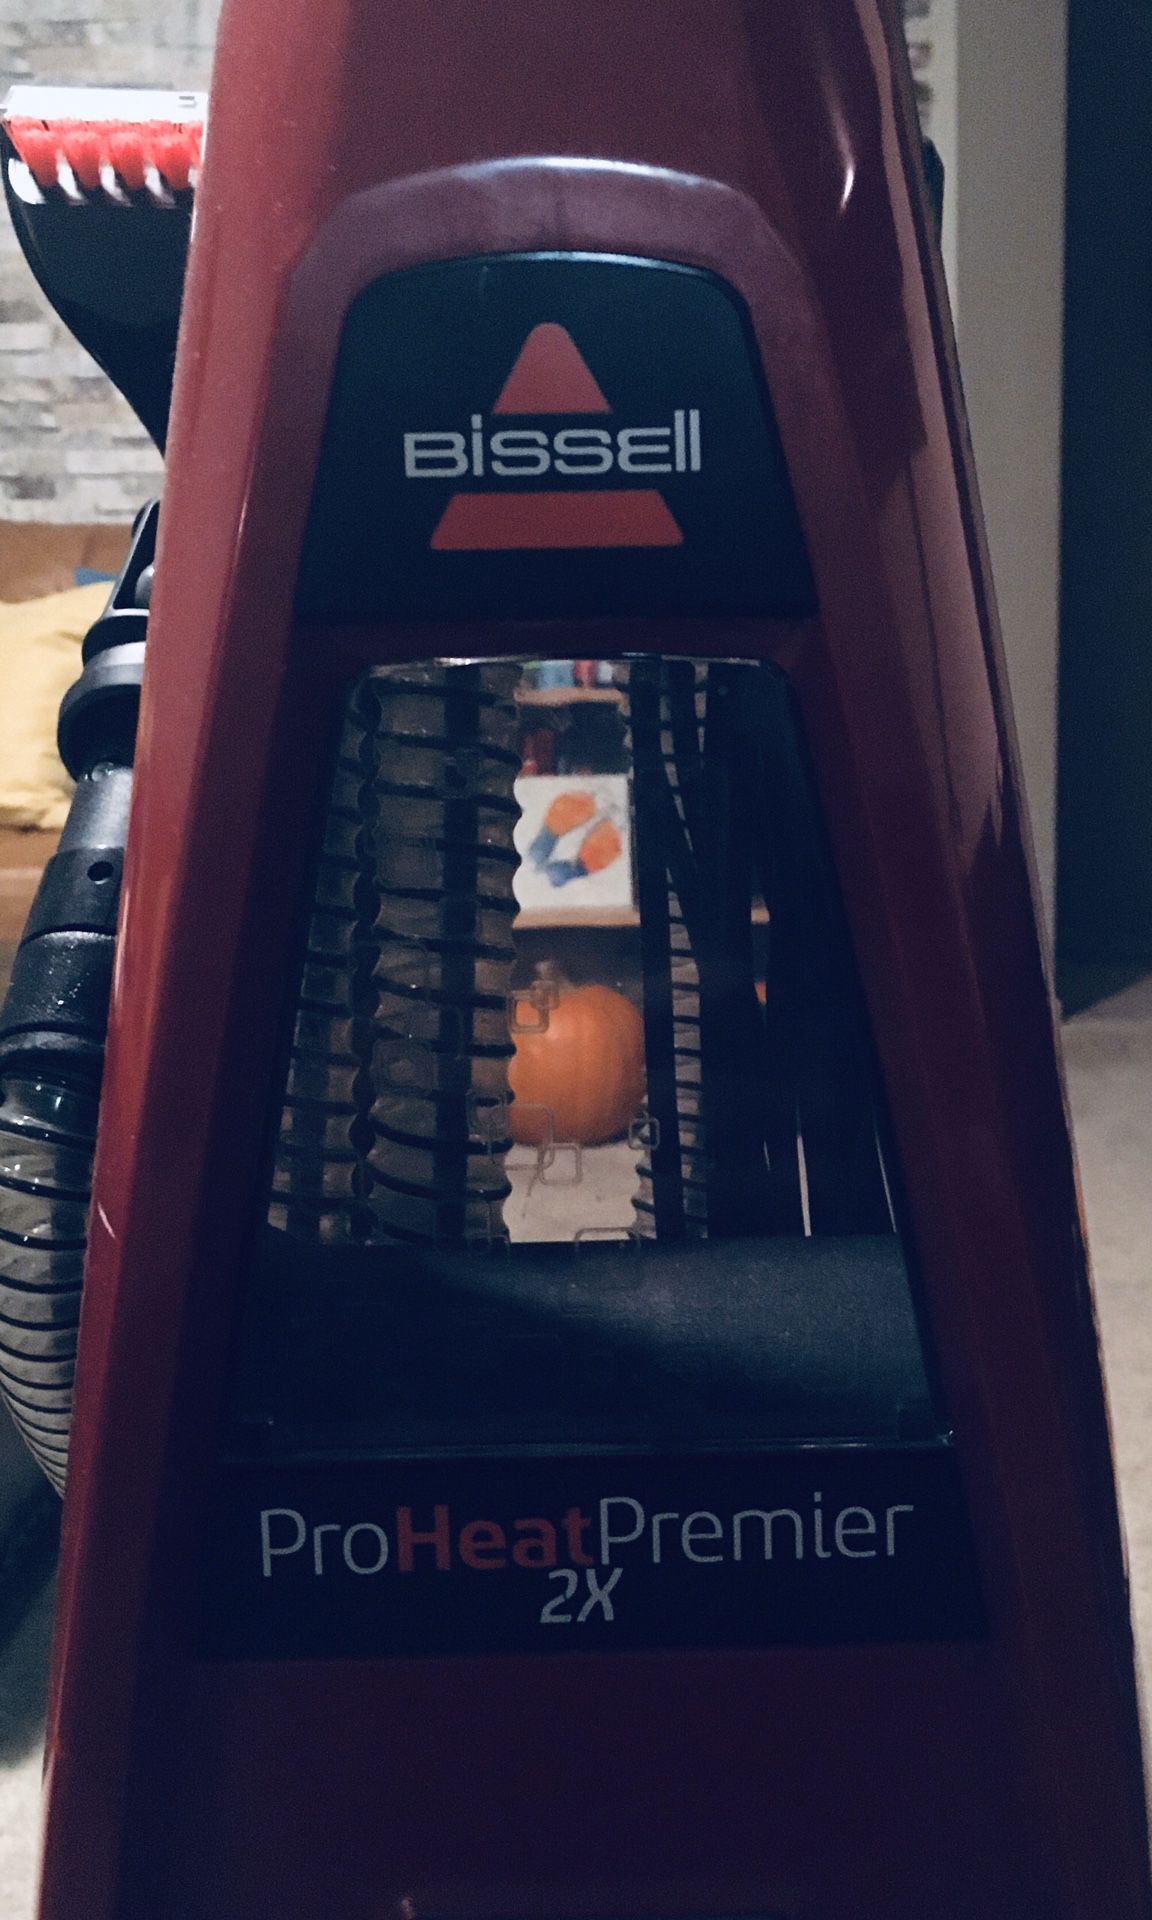 Bissell 47A24 ProHeat Premiere 2x Carpet Cleaner